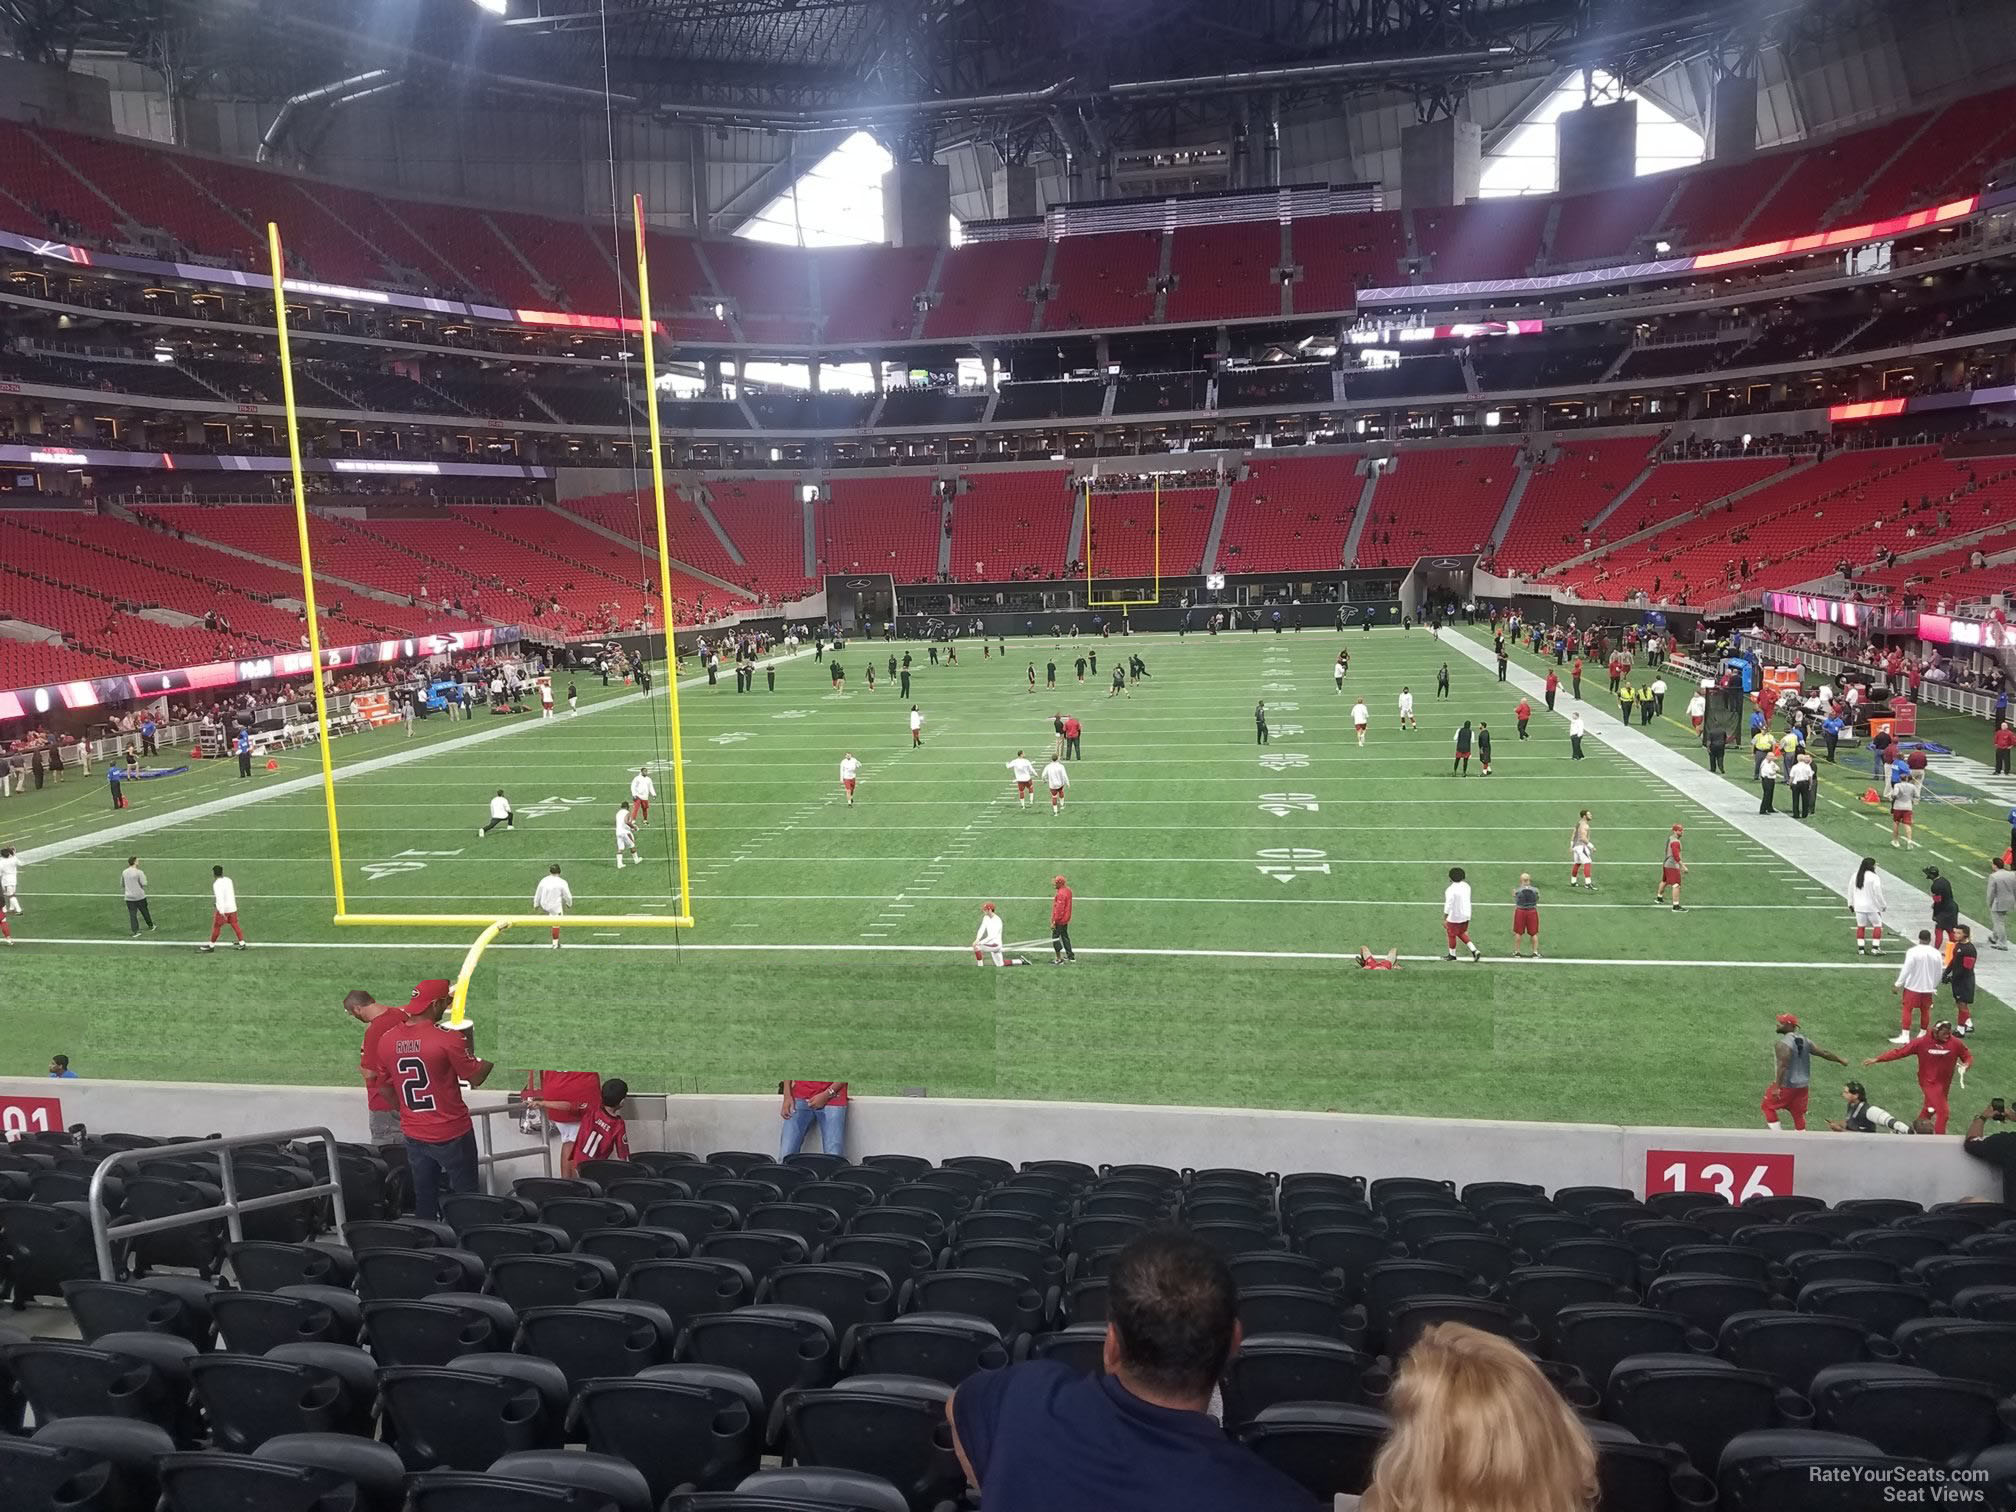 section 136, row 25 seat view  for football - mercedes-benz stadium